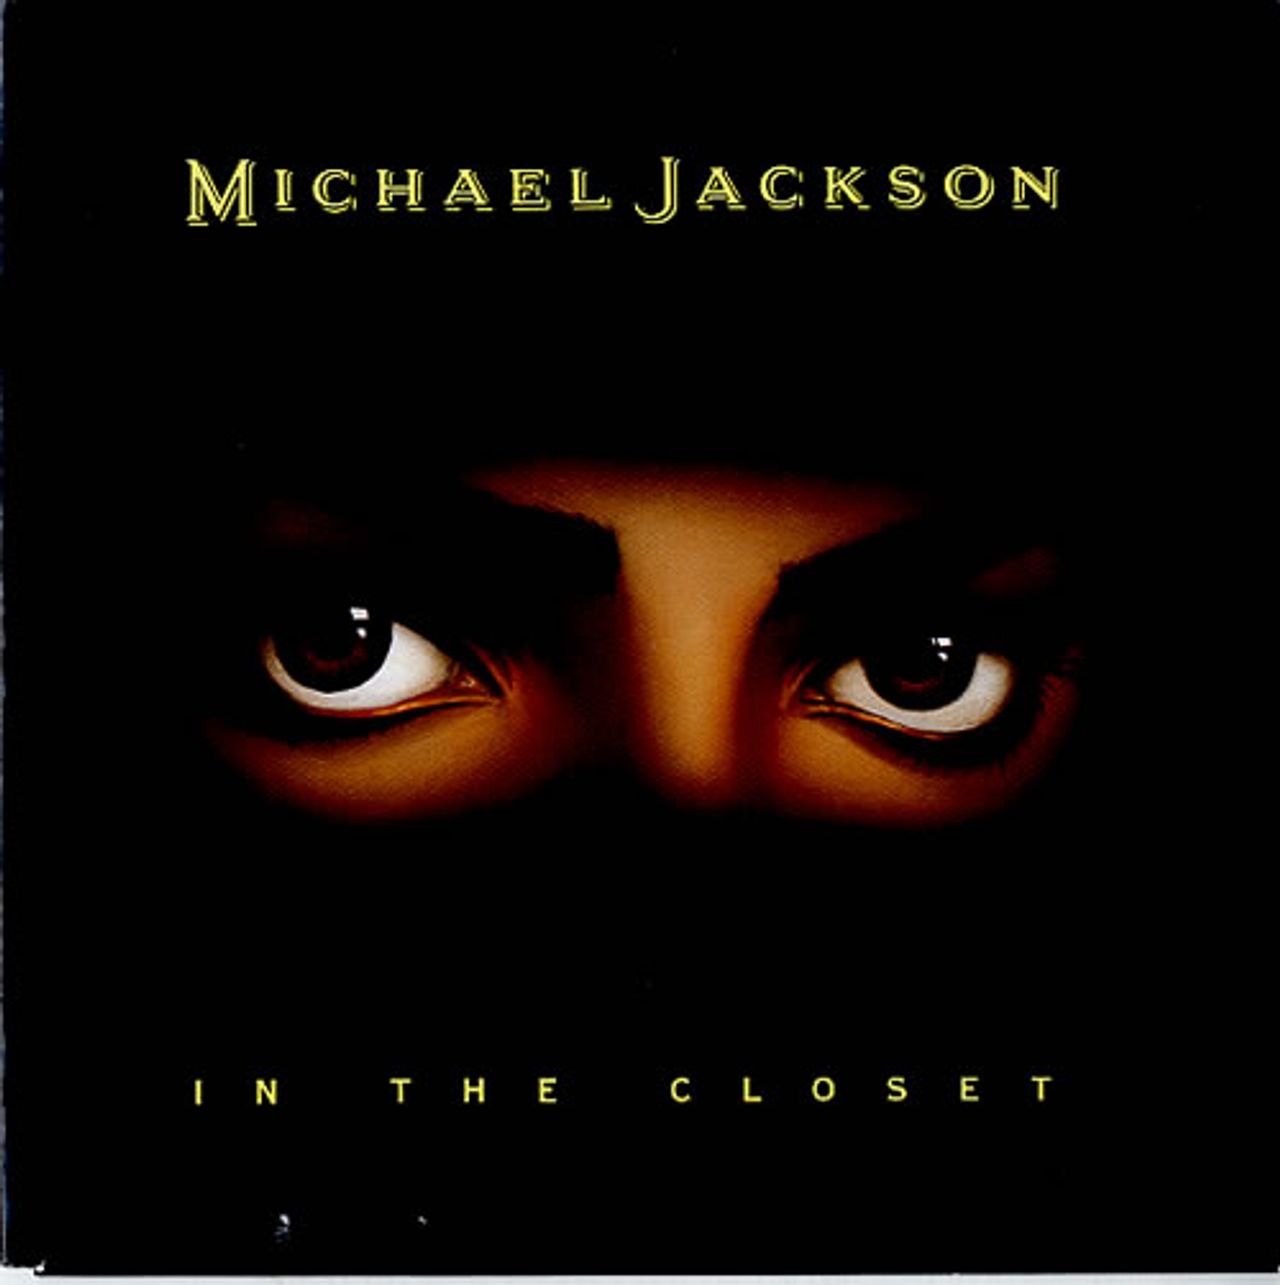 Michael Jackson from in the closet - Michael Jackson Official Site